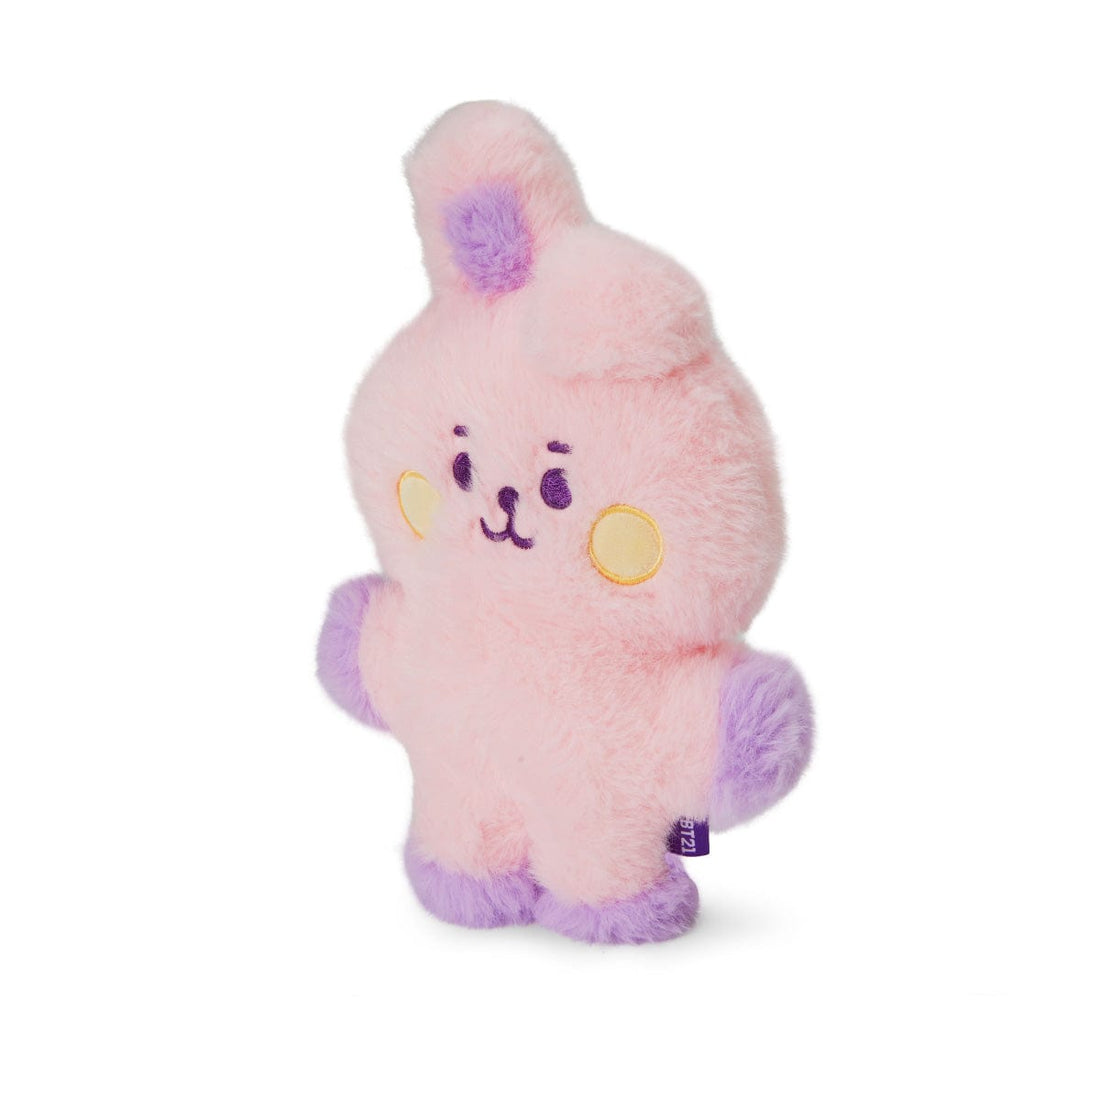 BT21 TOYS COOKY BT21 BABY COOKY FLAT FUR STANDING DOLL PURPLE HEART EDITION